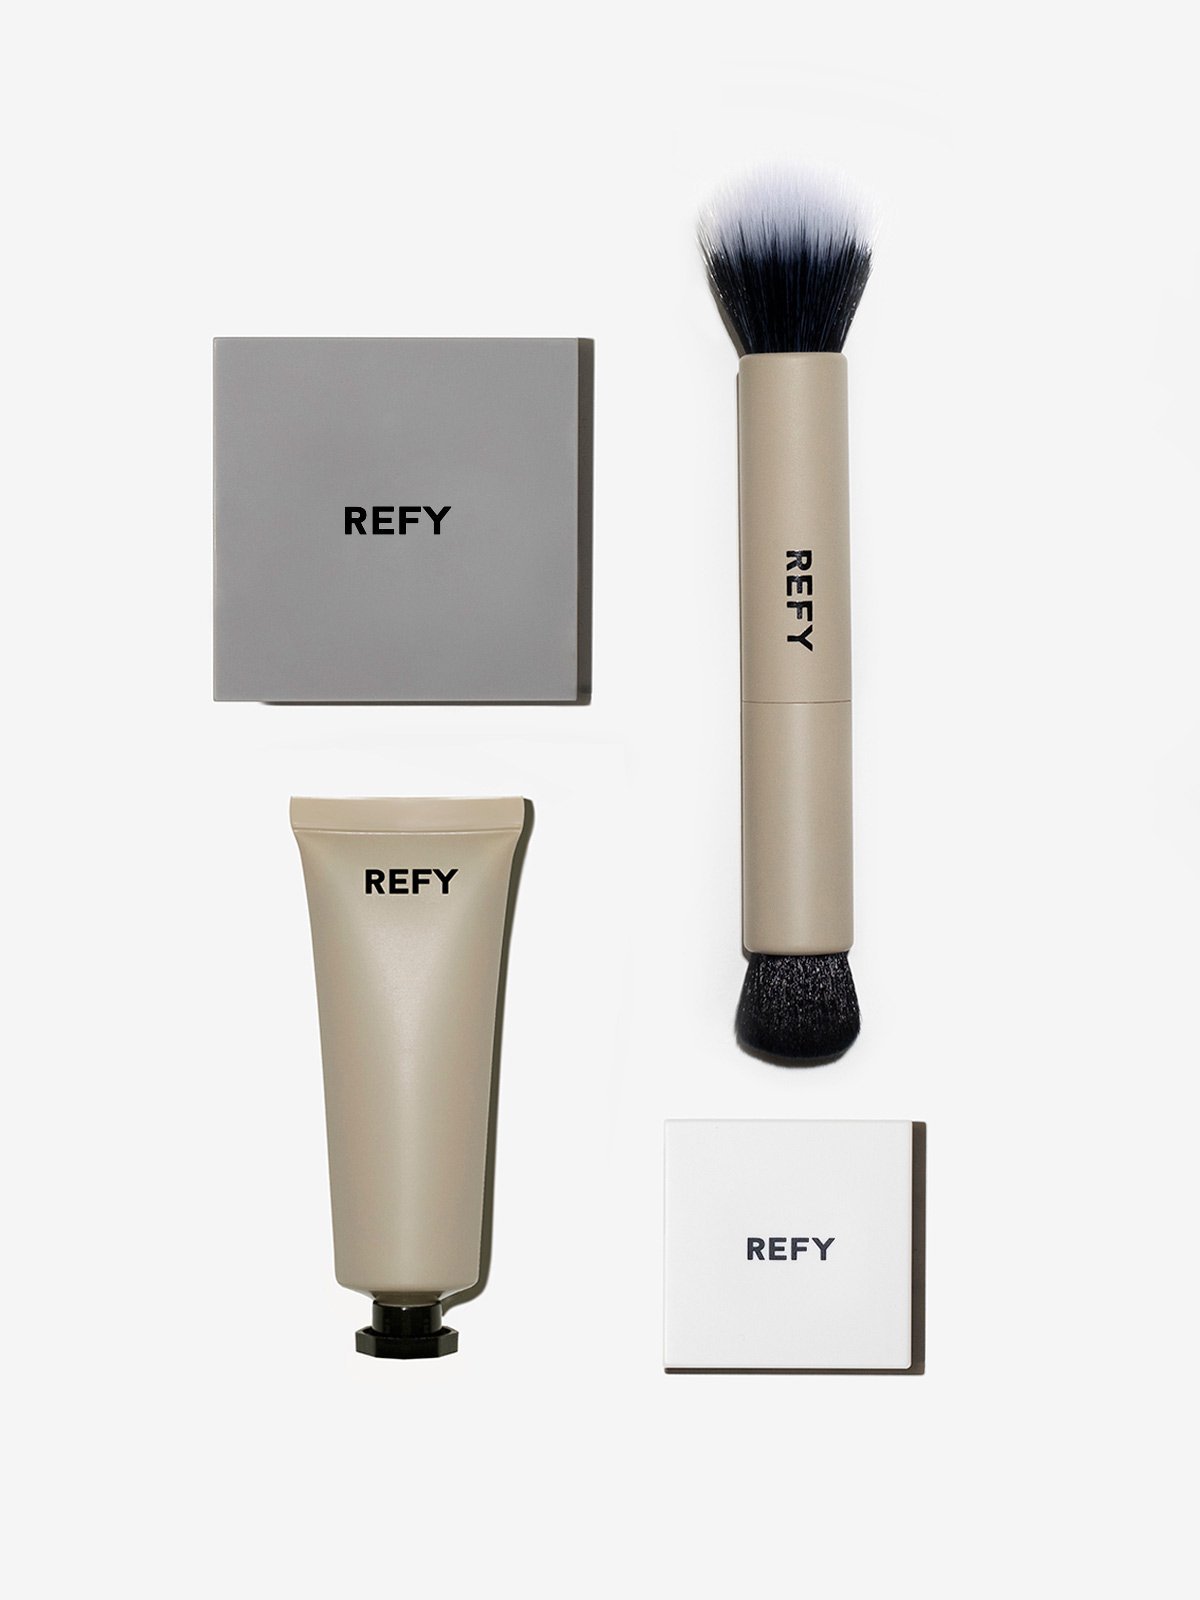 FRONT IMAGE OF REFY FACE SET + DUO BRUSH. CONTAINS CREAM BLUSH, CREAM BRONZER, GLOSS HIGHLIGHTER, DUO BRUSH